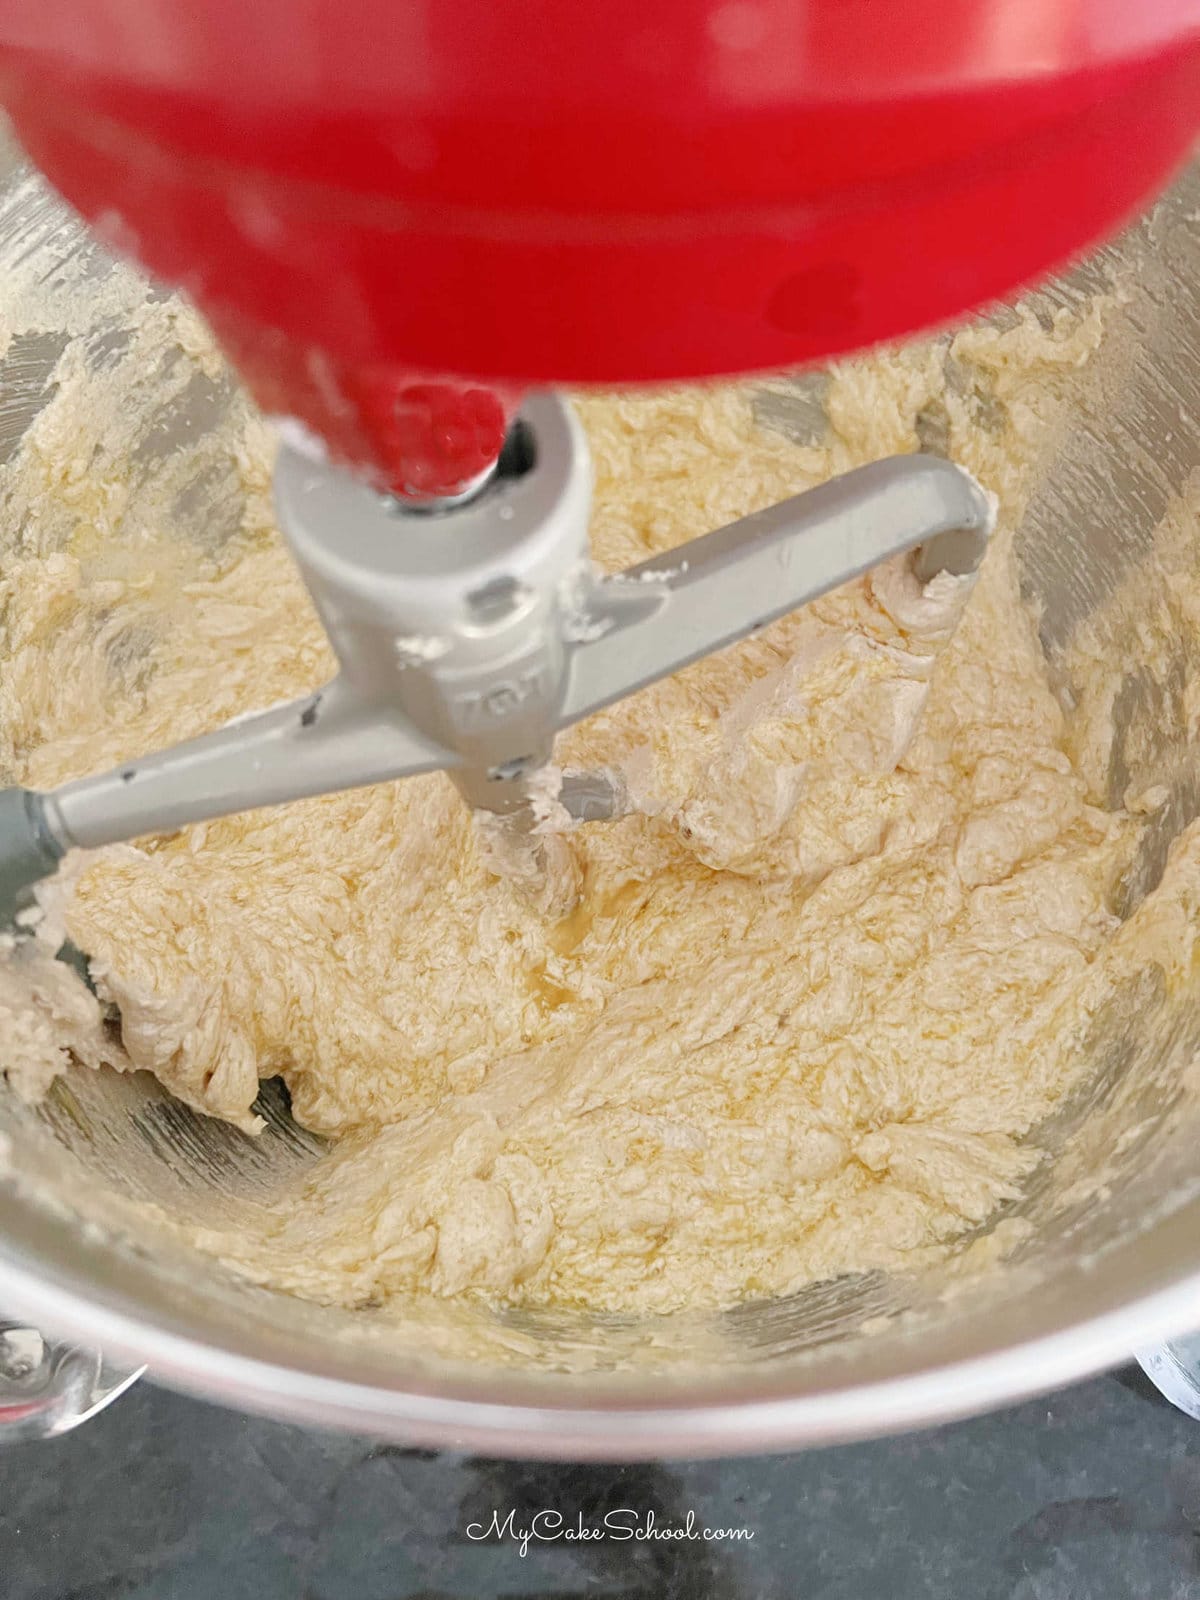 Bowl of cake batter in the mixer